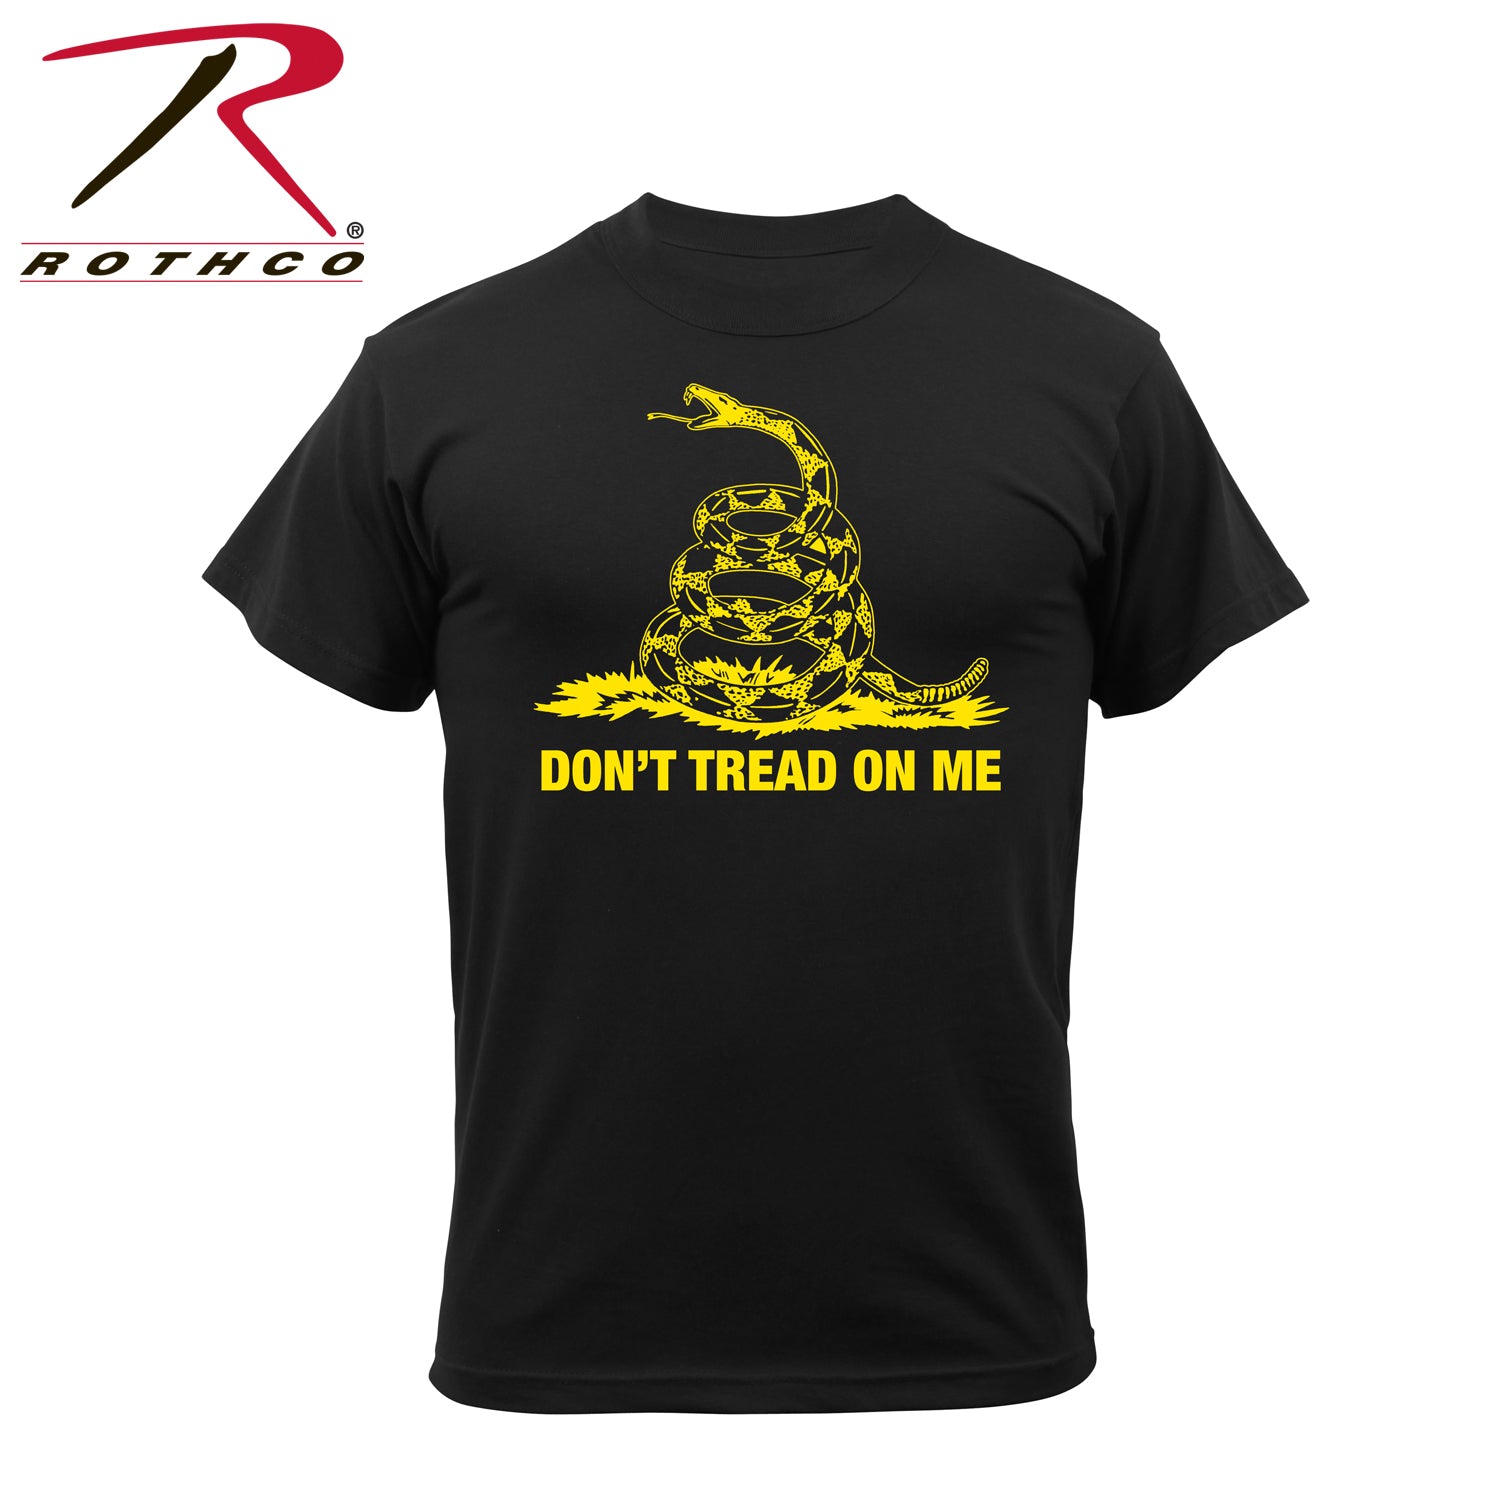 Rothco Don't Tread On Me T-Shirt - Tactical Choice Plus